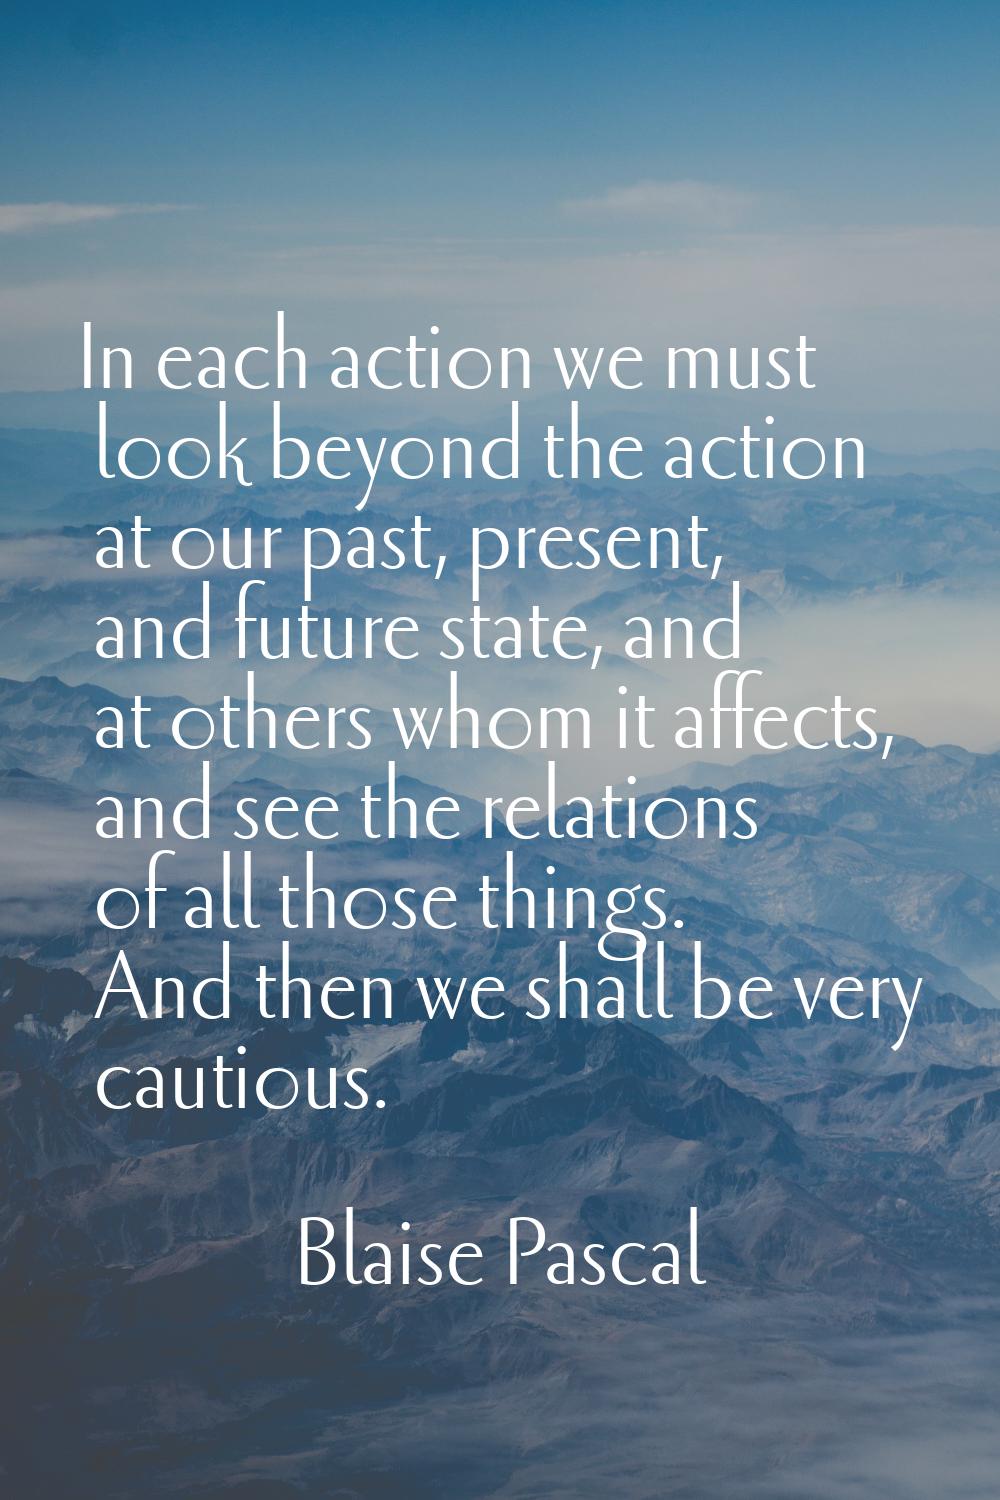 In each action we must look beyond the action at our past, present, and future state, and at others